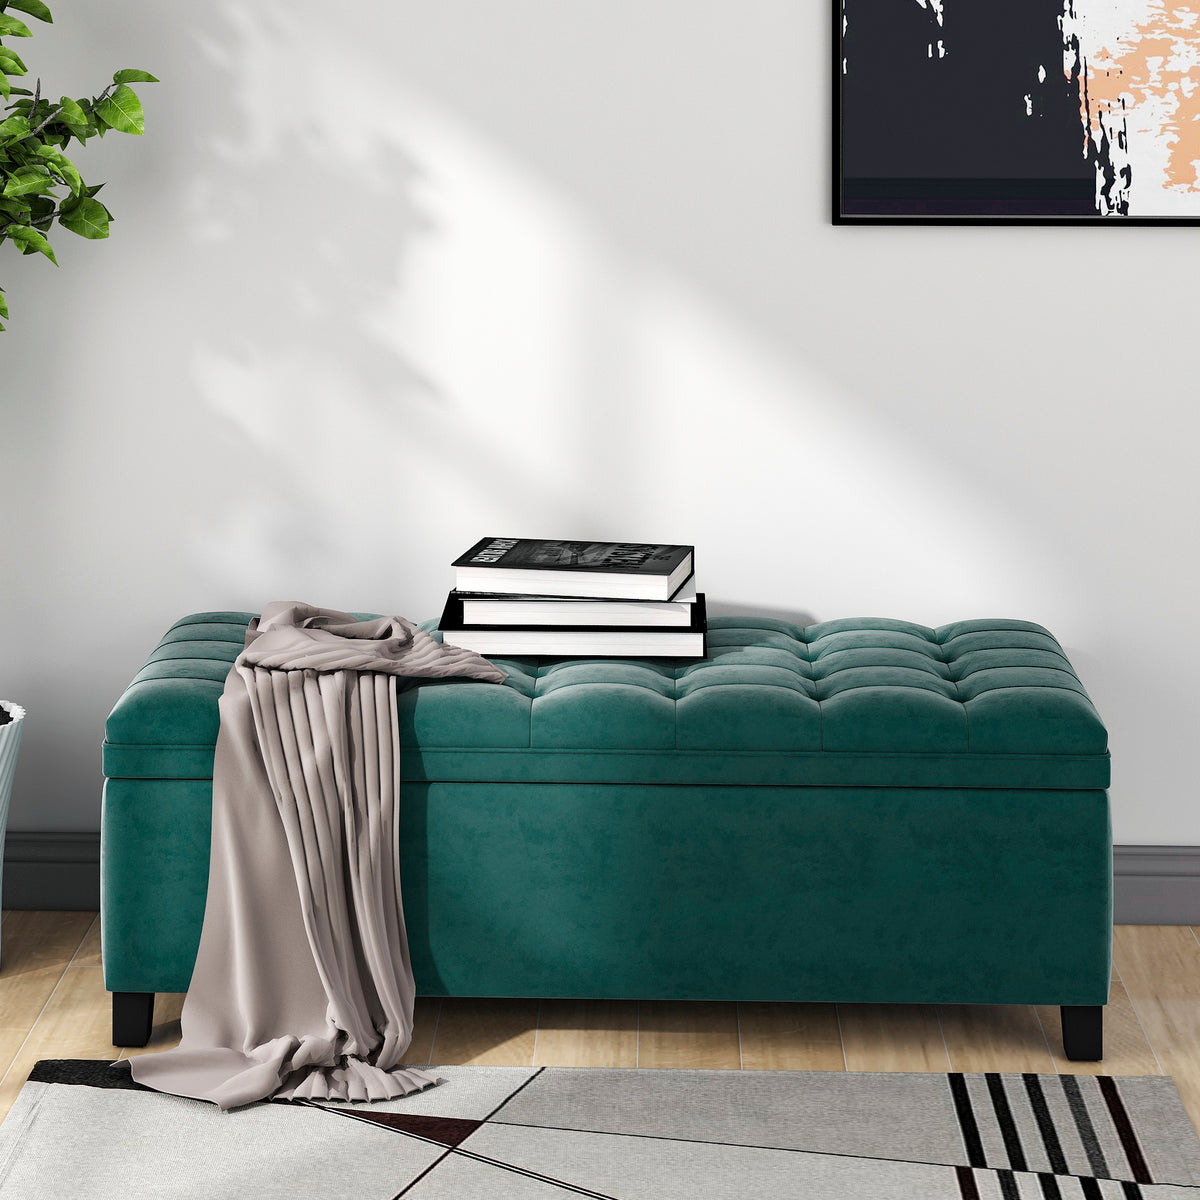 NOBLEMOOD End of Bed Storage Bench, Entryway Bench with Flip-up Seating, Under Window Bench for Living Room